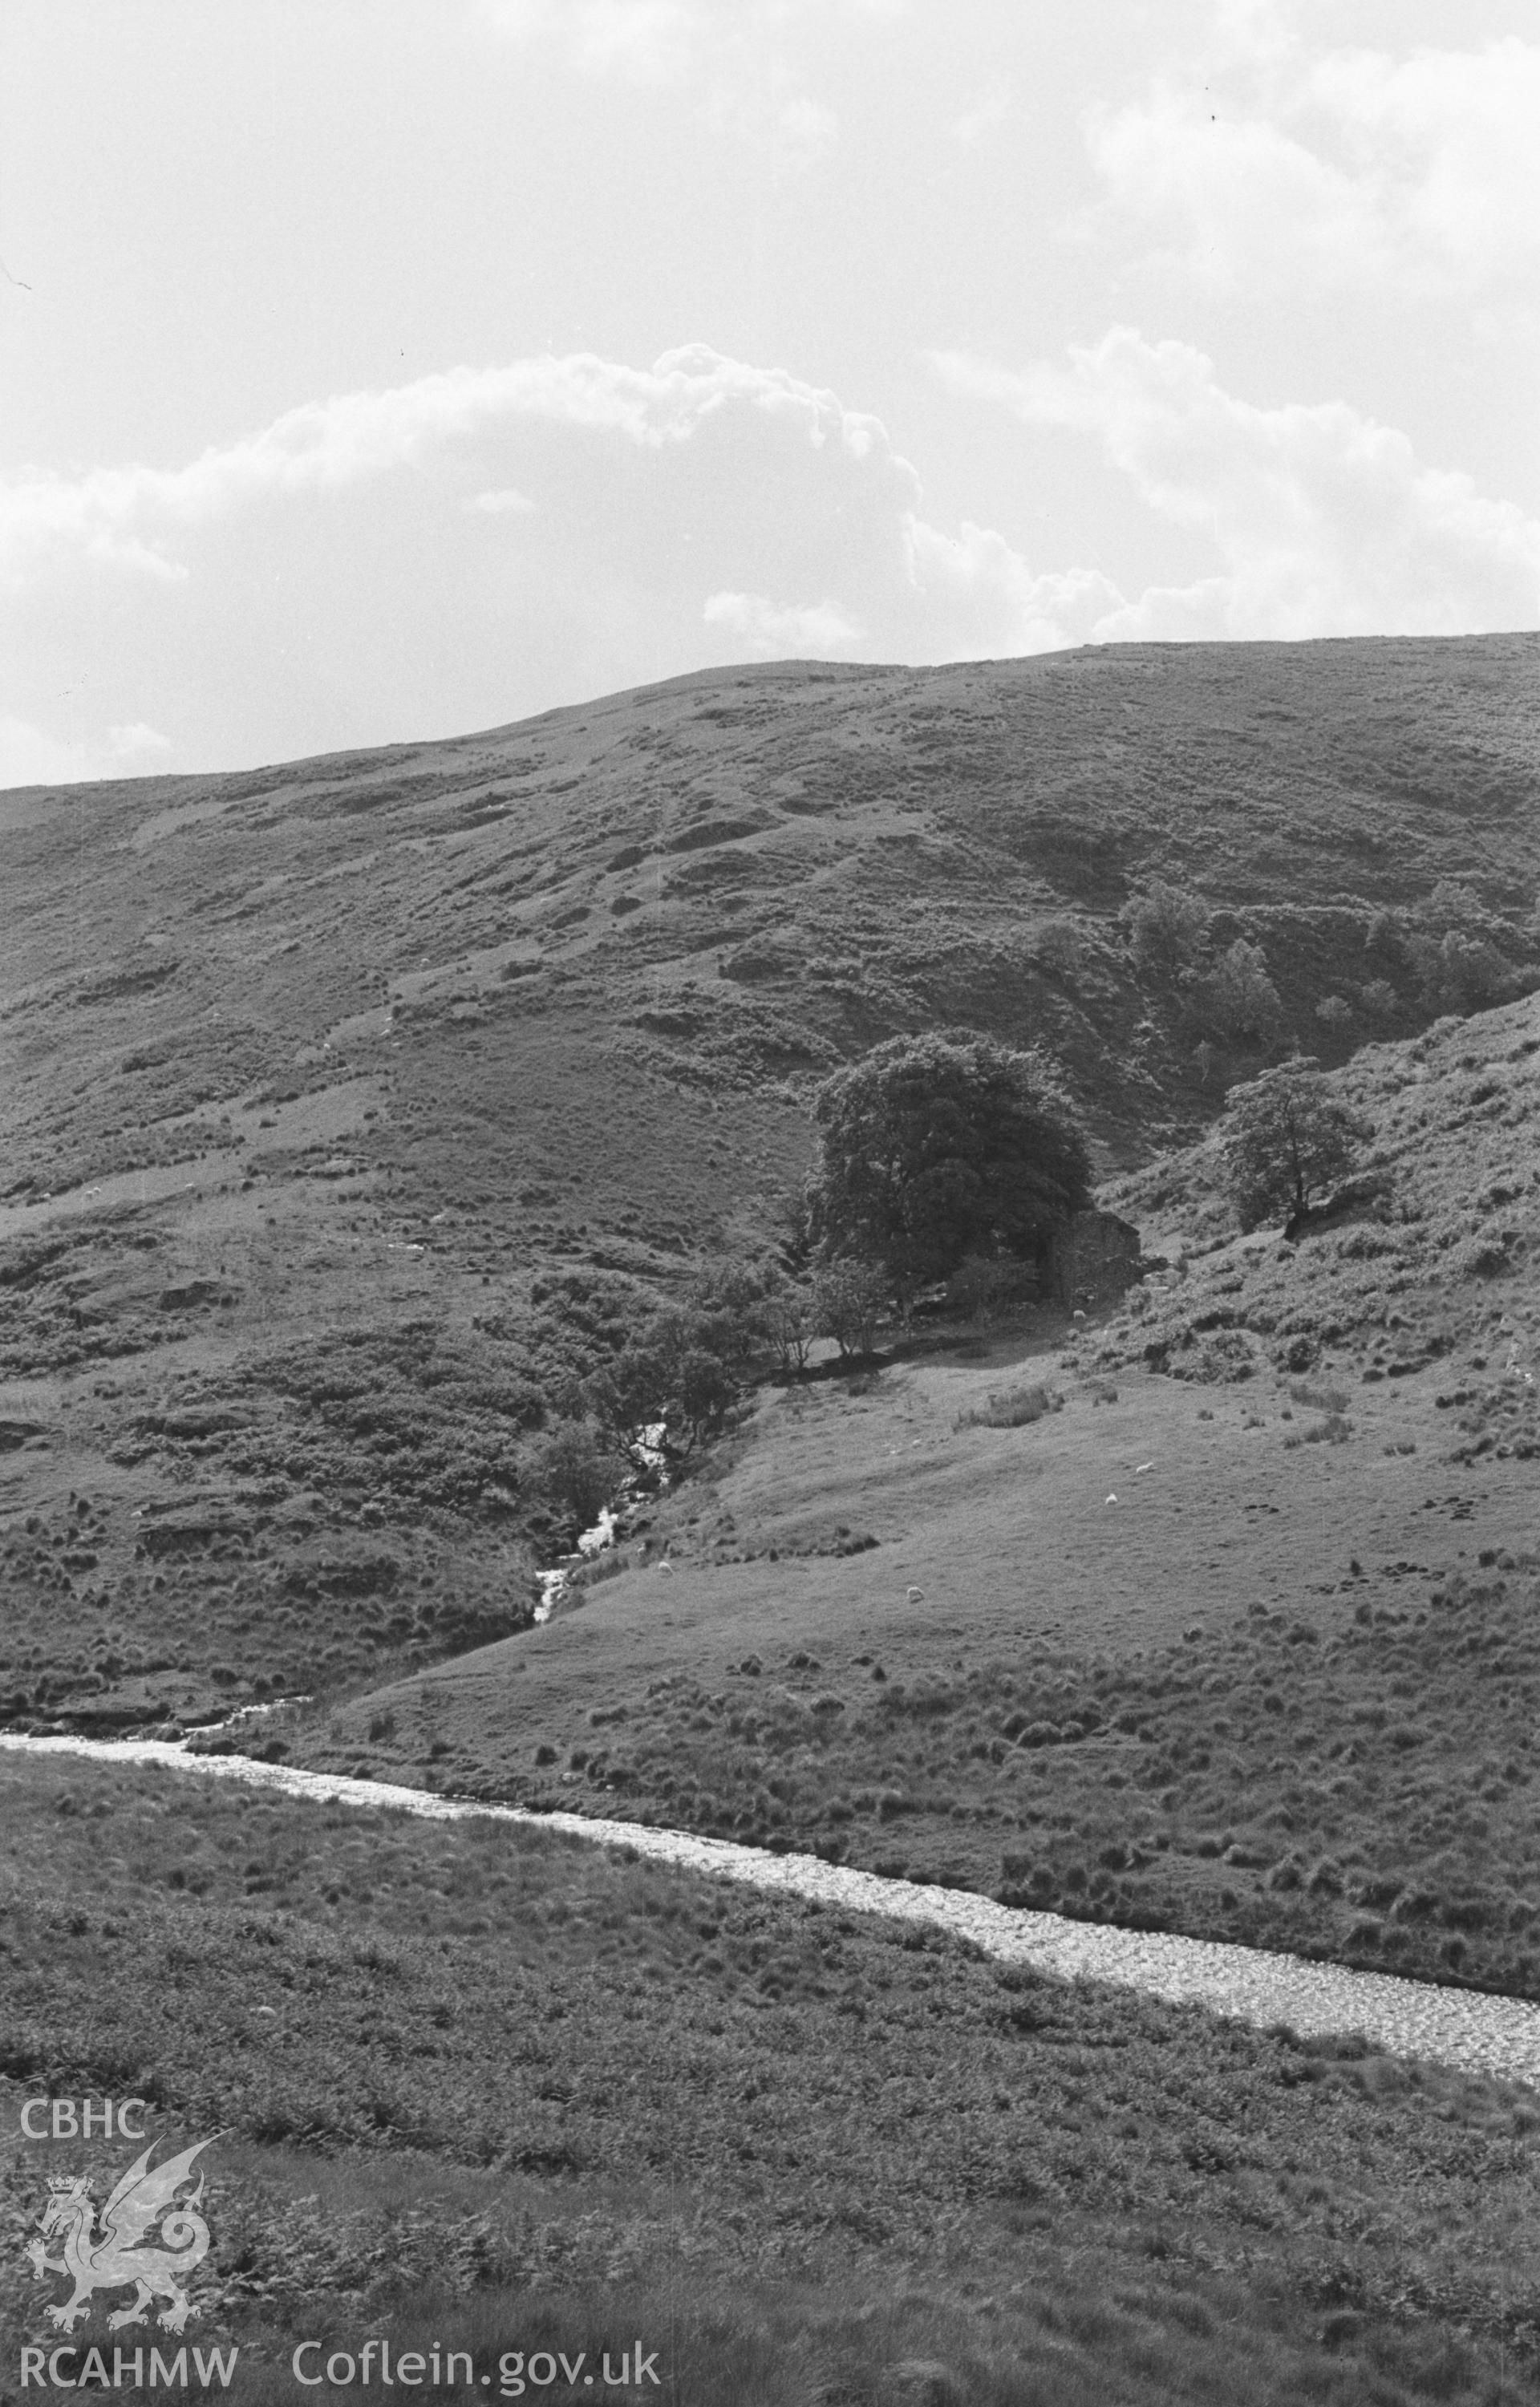 Digital copy of a black and white negative showing view across the Camddwr to the ruin of Nant-y-Graig farm in the trees, near Soar y Mynydd. Photographed in September 1963 by Arthur O. Chater from Grid Reference SN 7815 5435, looking south west.